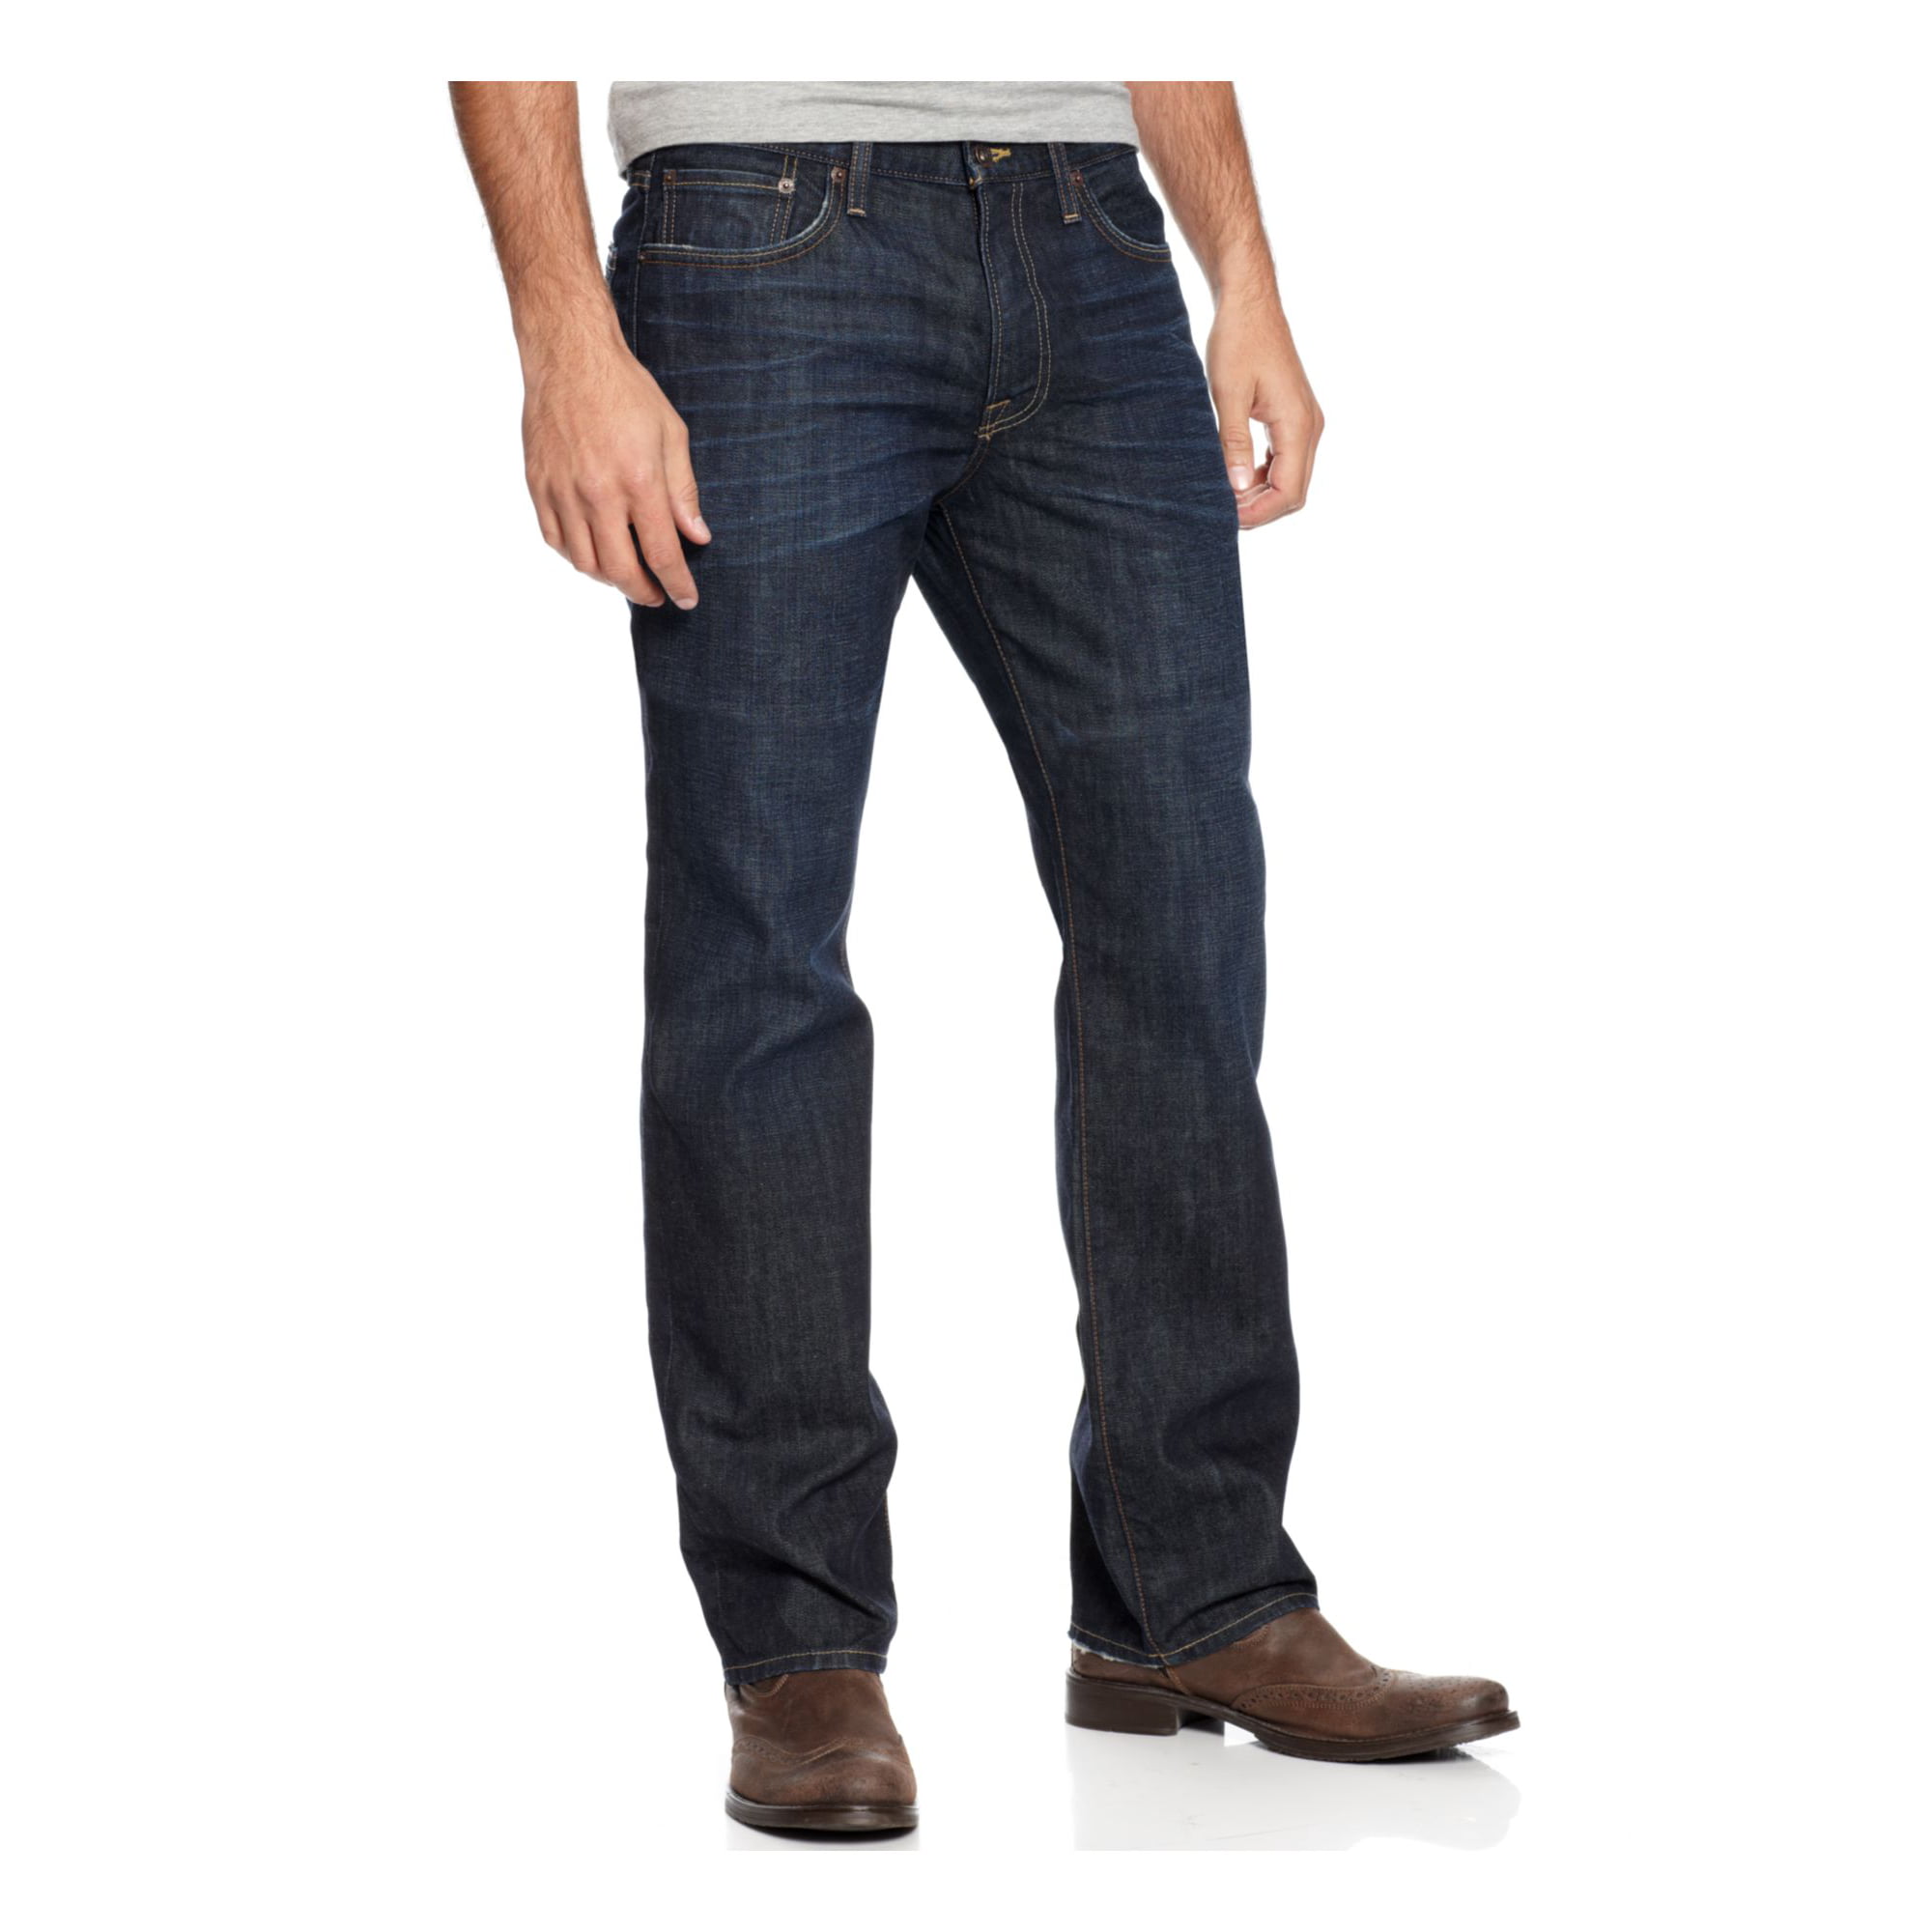 LUCKY BRAND Mens Blue Leg, Heather Relaxed Fit Jeans W40/ L32 - Walmart.com